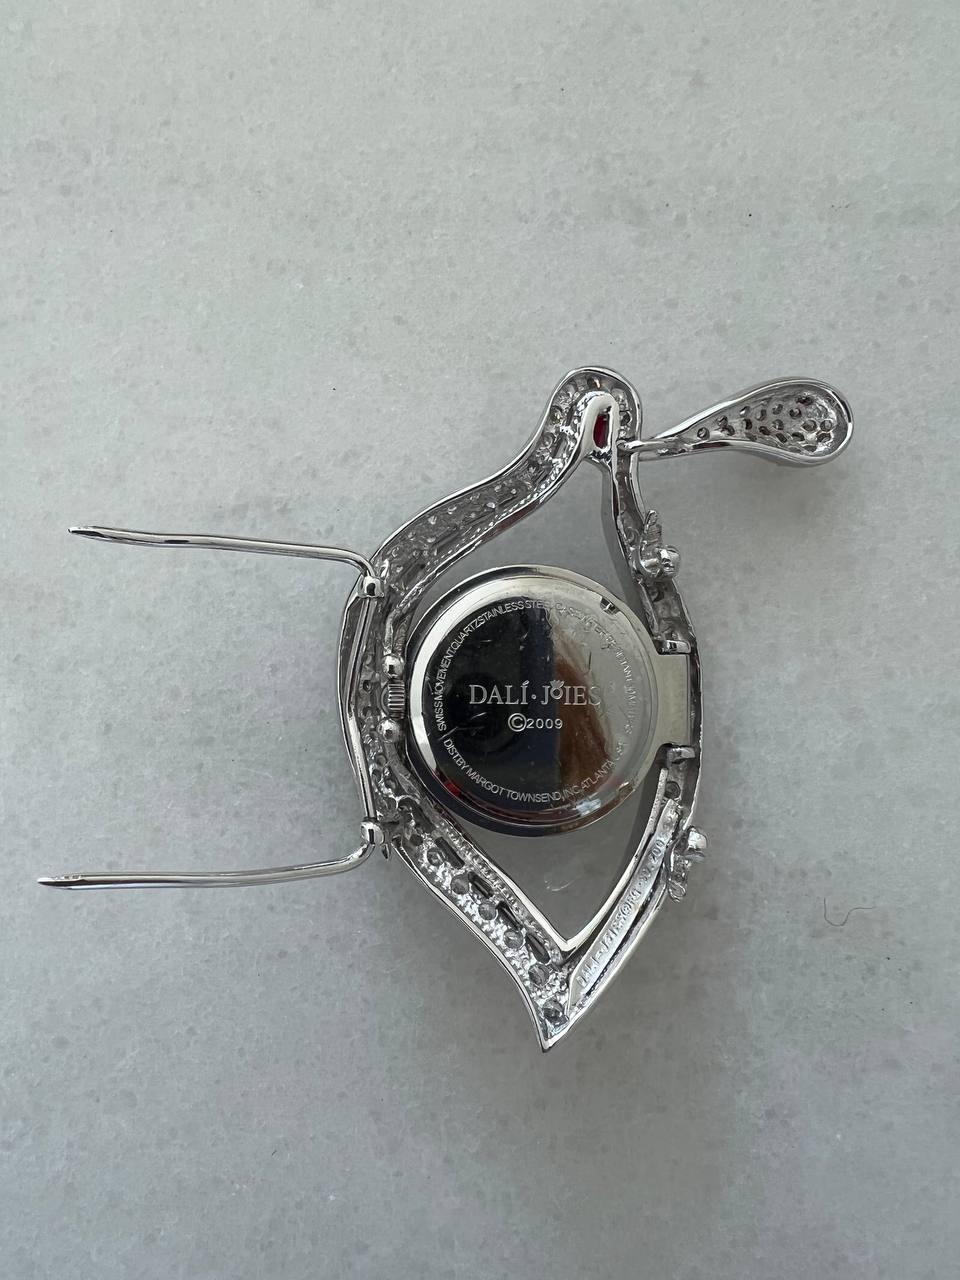 Brooch designed by Salvador Dali in the form of eye centered with a watch. Embedded with rhinestones. 
Year: 2009 
Condition: very good

........Additional information ........

- Photo might be slightly different from actual item in terms of color